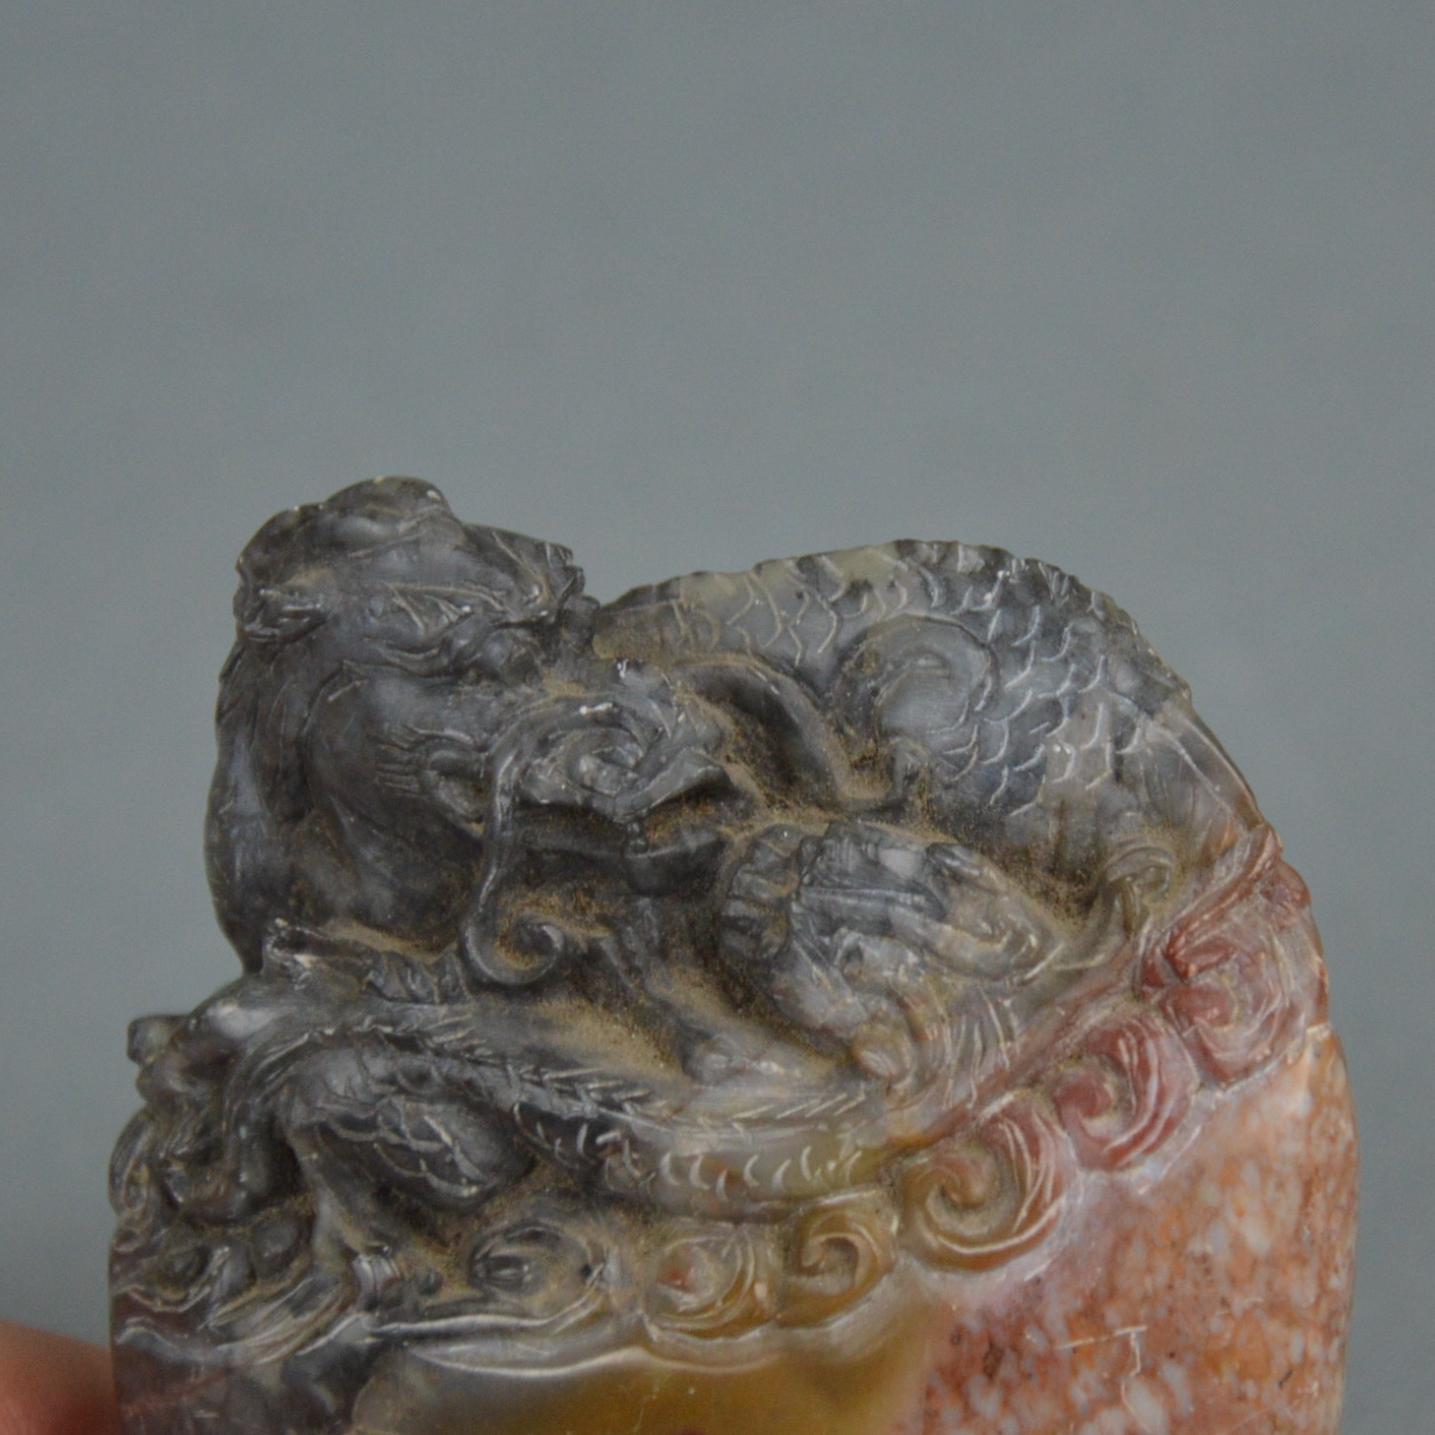 Miniature Chinese Stone Sculpture Representing a Dragon Lying on a Rock im Angebot 3